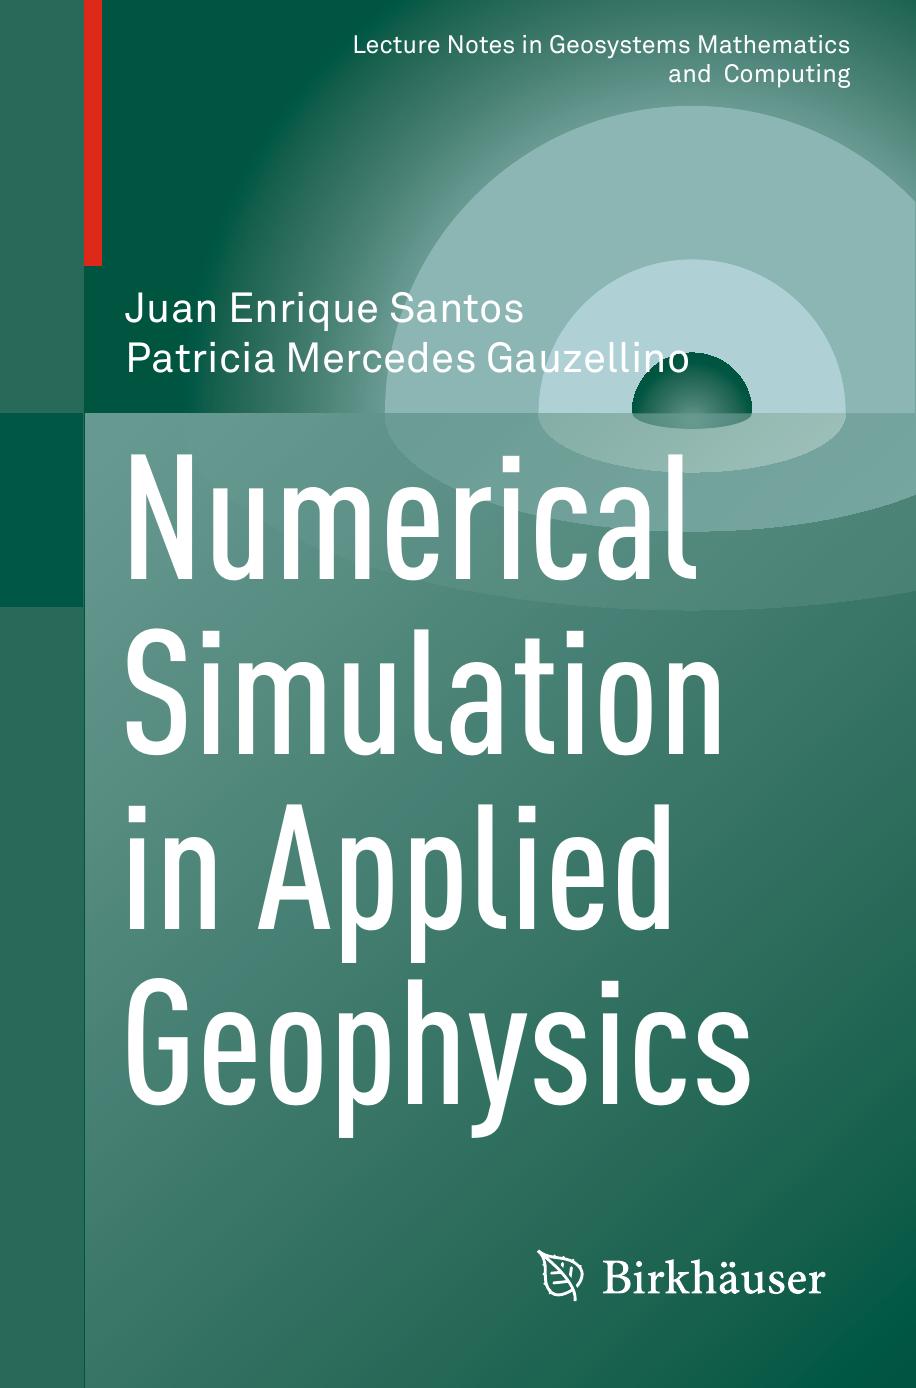 Numerical Simulation in Applied Geophysics 2016 ( PDFDrive.com )